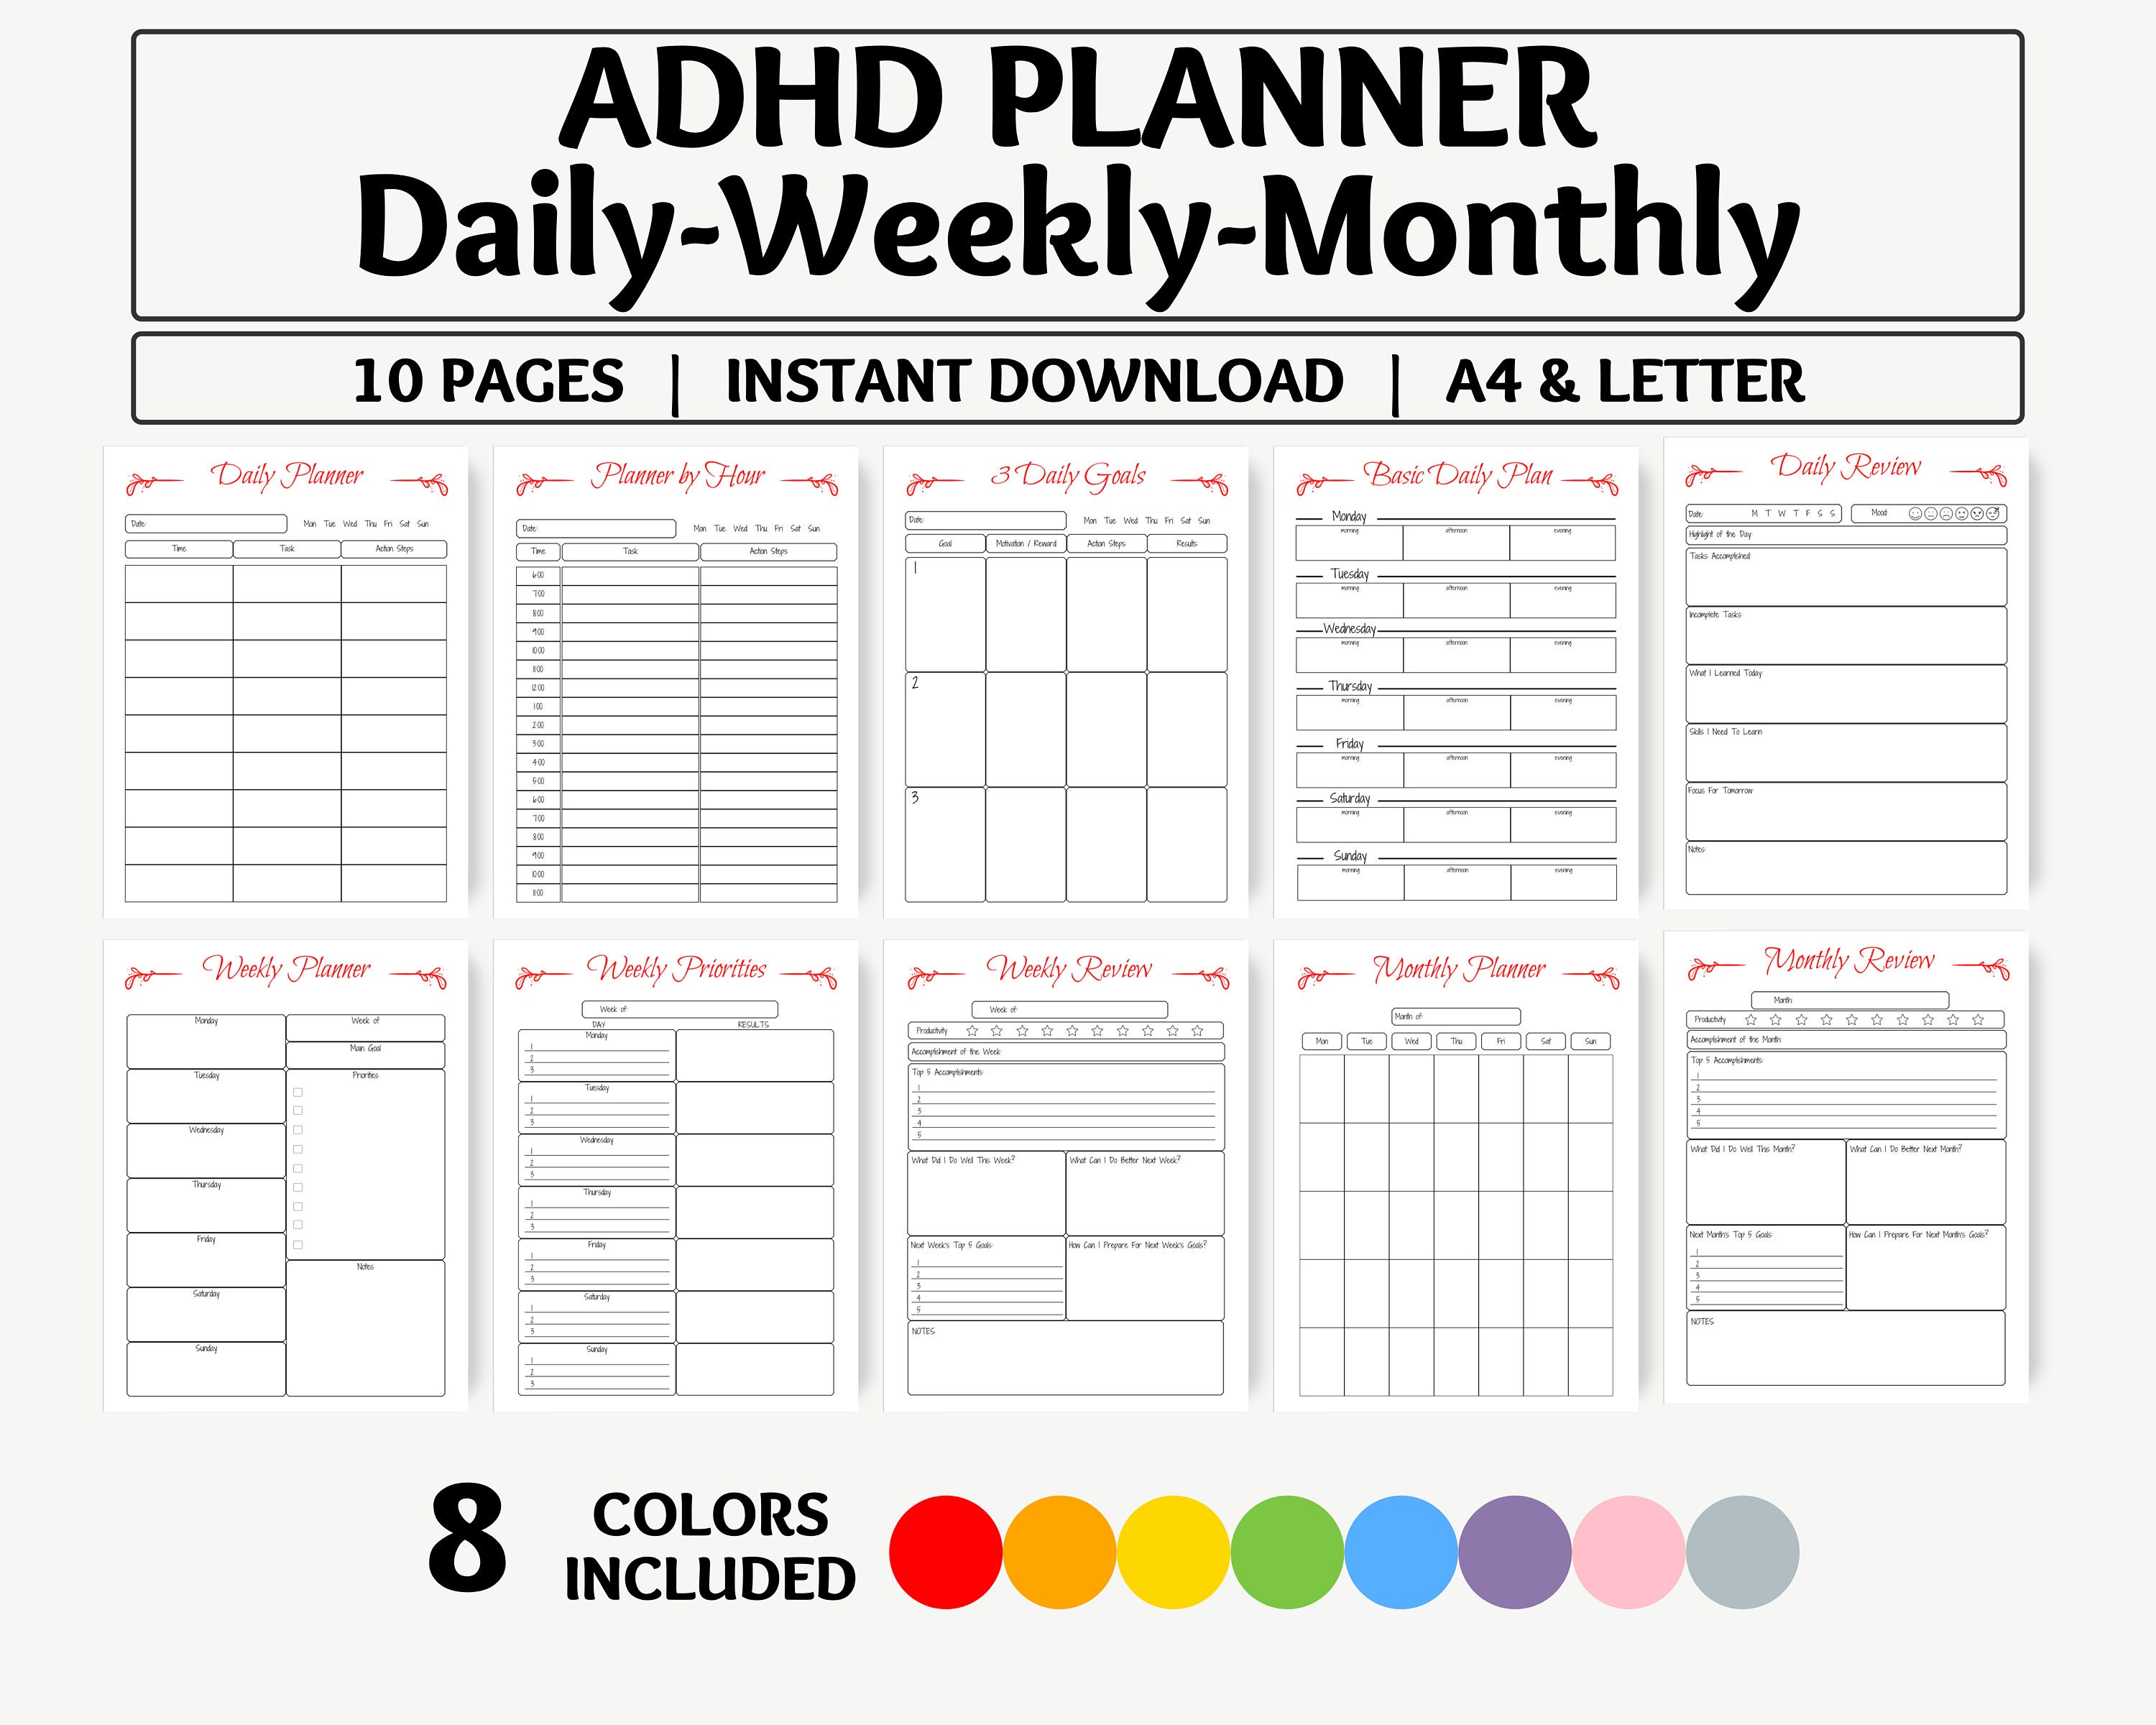 paper-printable-a4-letter-ipad-tablet-adhd-planner-productivity-daily